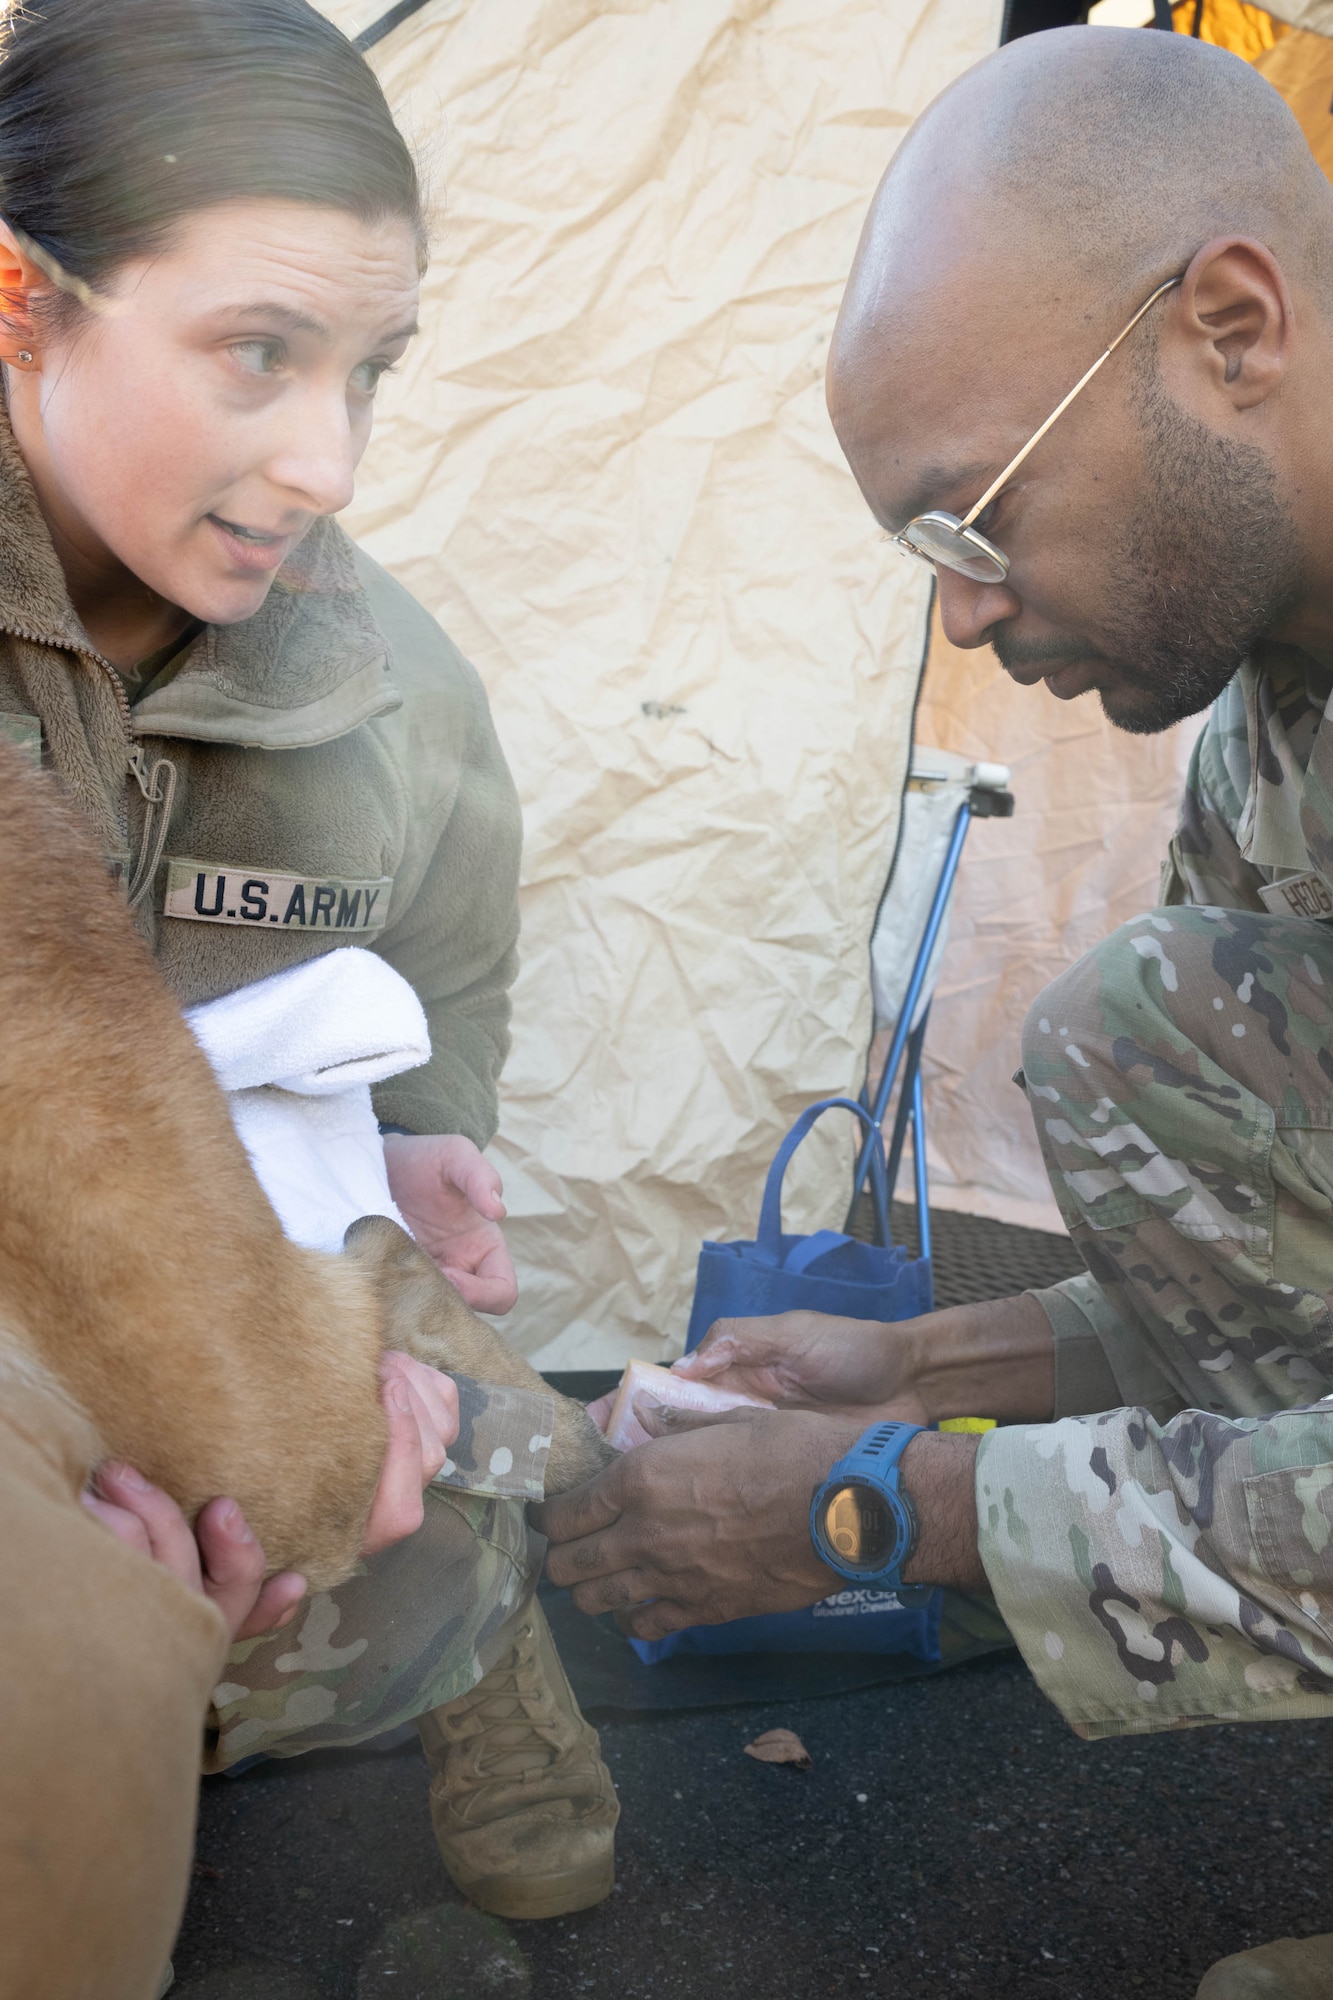 U.S. Army Capt. Alicia Bailey, left, Dover Air Force Base Veterinary Treatment Facility officer in charge, supervises U.S. Air Force Staff Sgt. Dominique Hedges, 436th Operational Medical Readiness Squadron physical therapy assistant, as he practices decontamination techniques on Military Working Dog Zorro during a training session at Dover Air Force Base, Delaware, Jan. 10, 2024. Members of the 436th Security Forces Squadron MWD section along with the Dover AFB Veterinary Treatment Facility and the 436th Medical Group Warm Zone team held a joint training session to practice the skills necessary to decontaminate MWDs and possibly save their lives in the aftermath of a nuclear, biological or chemical attack or spill. (U.S. Air Force photo by Mauricio Campino)